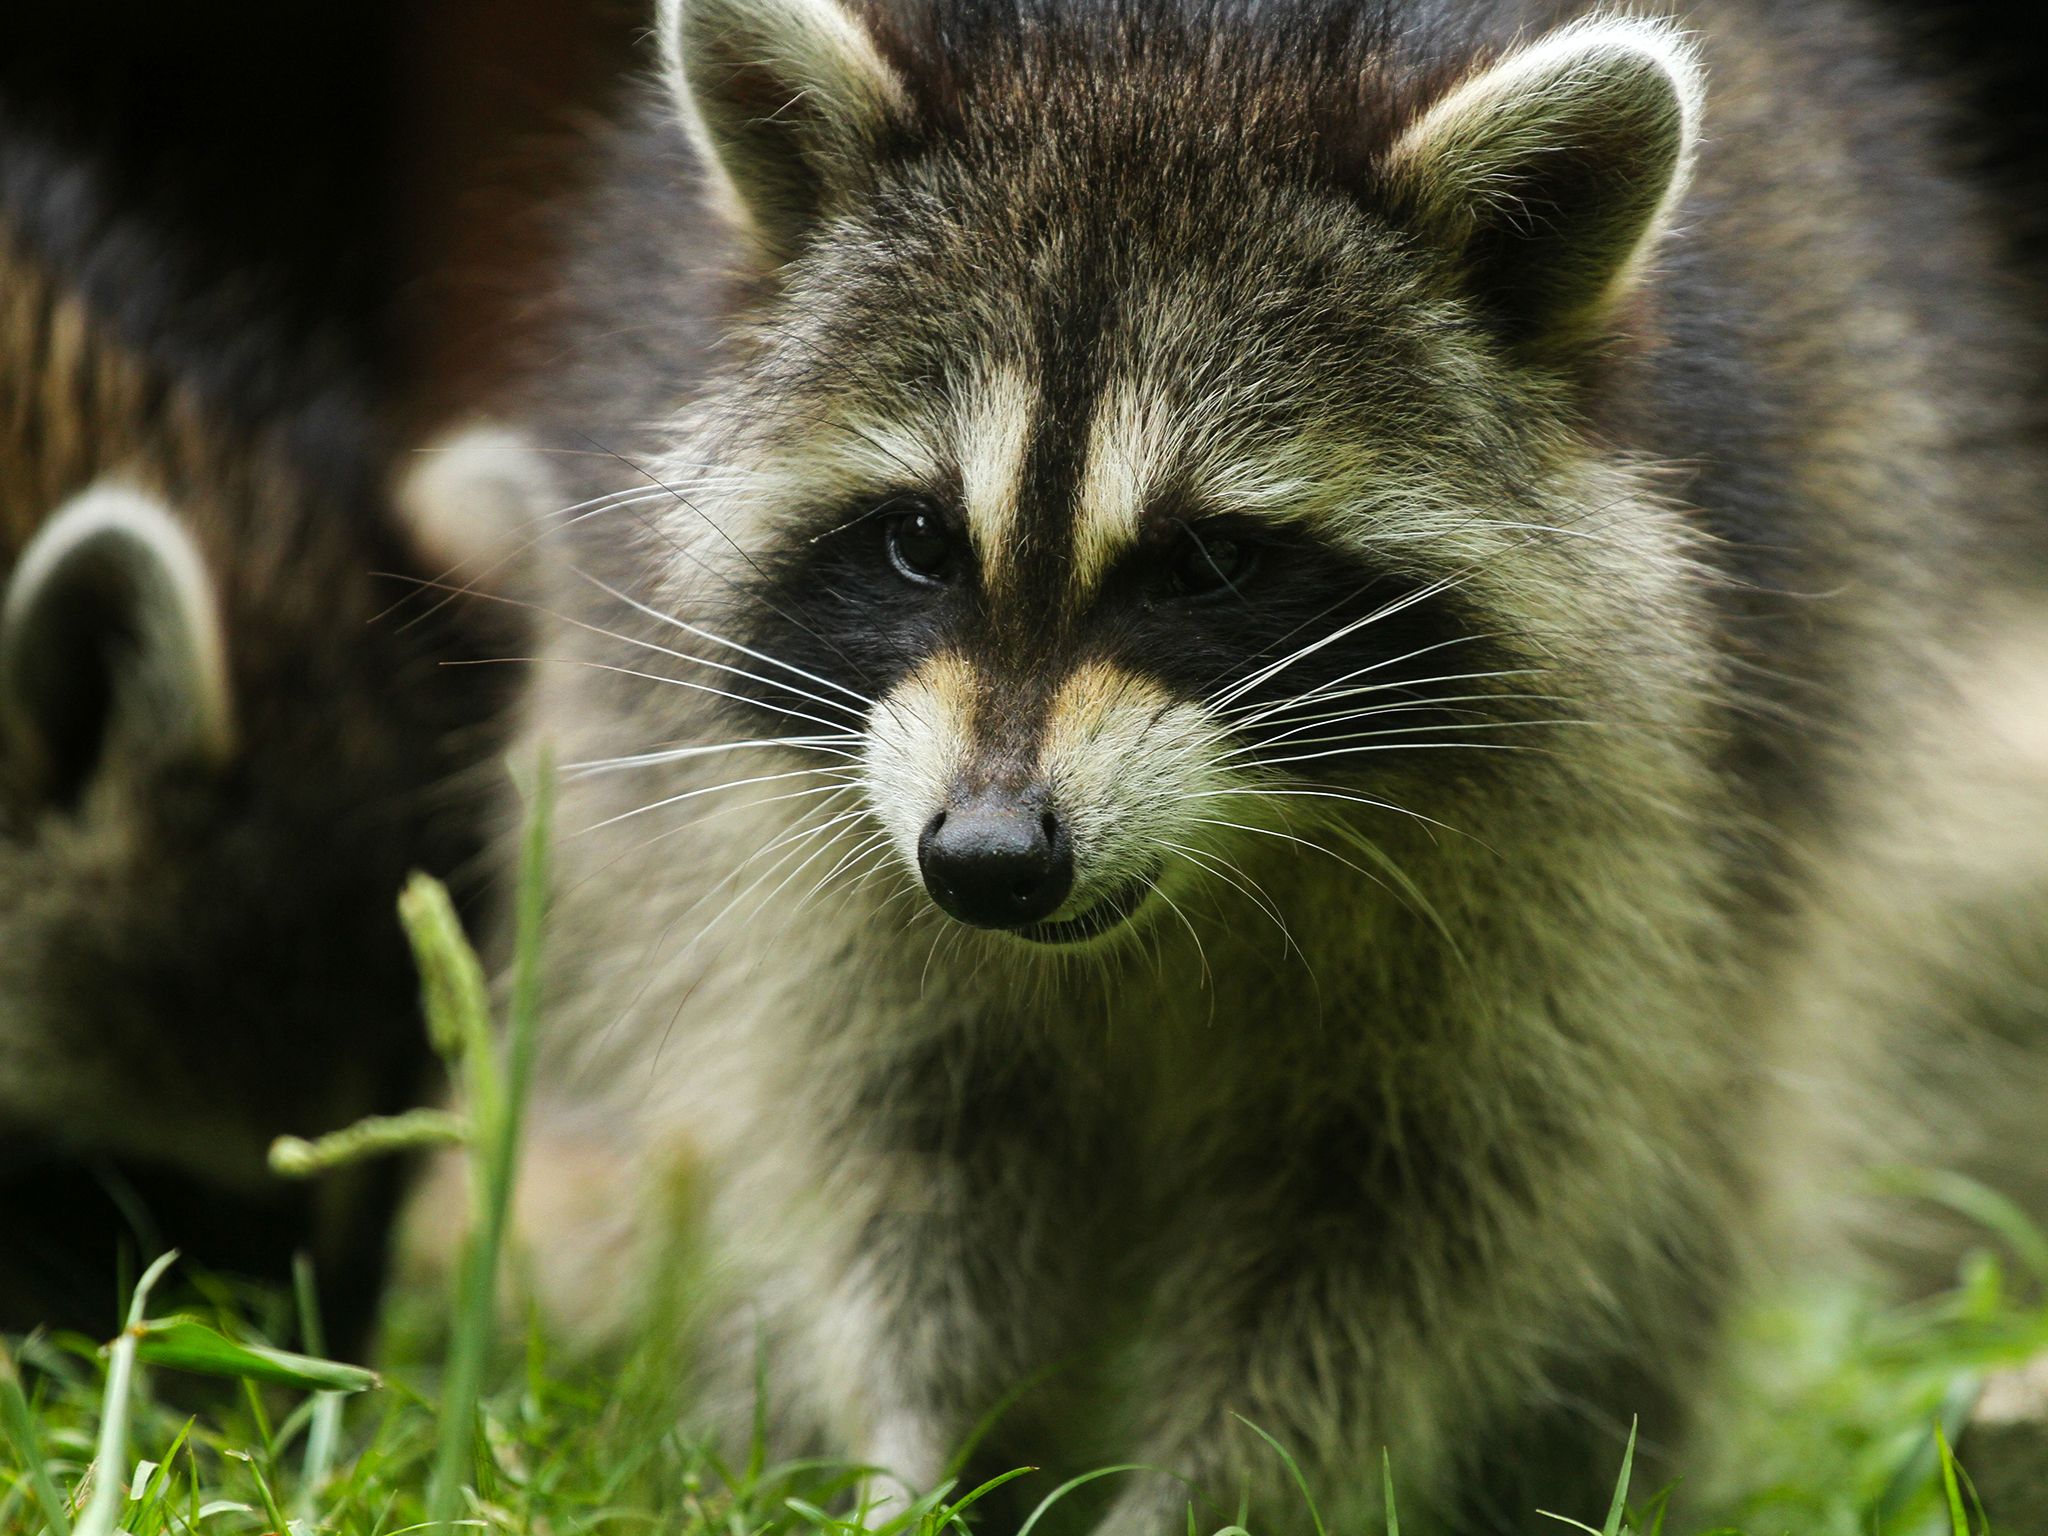 Washington, D.C.: A raccoon in the grass. This image is from Raccoon: Backyard Bandit. [Photo of the day - January 2015]